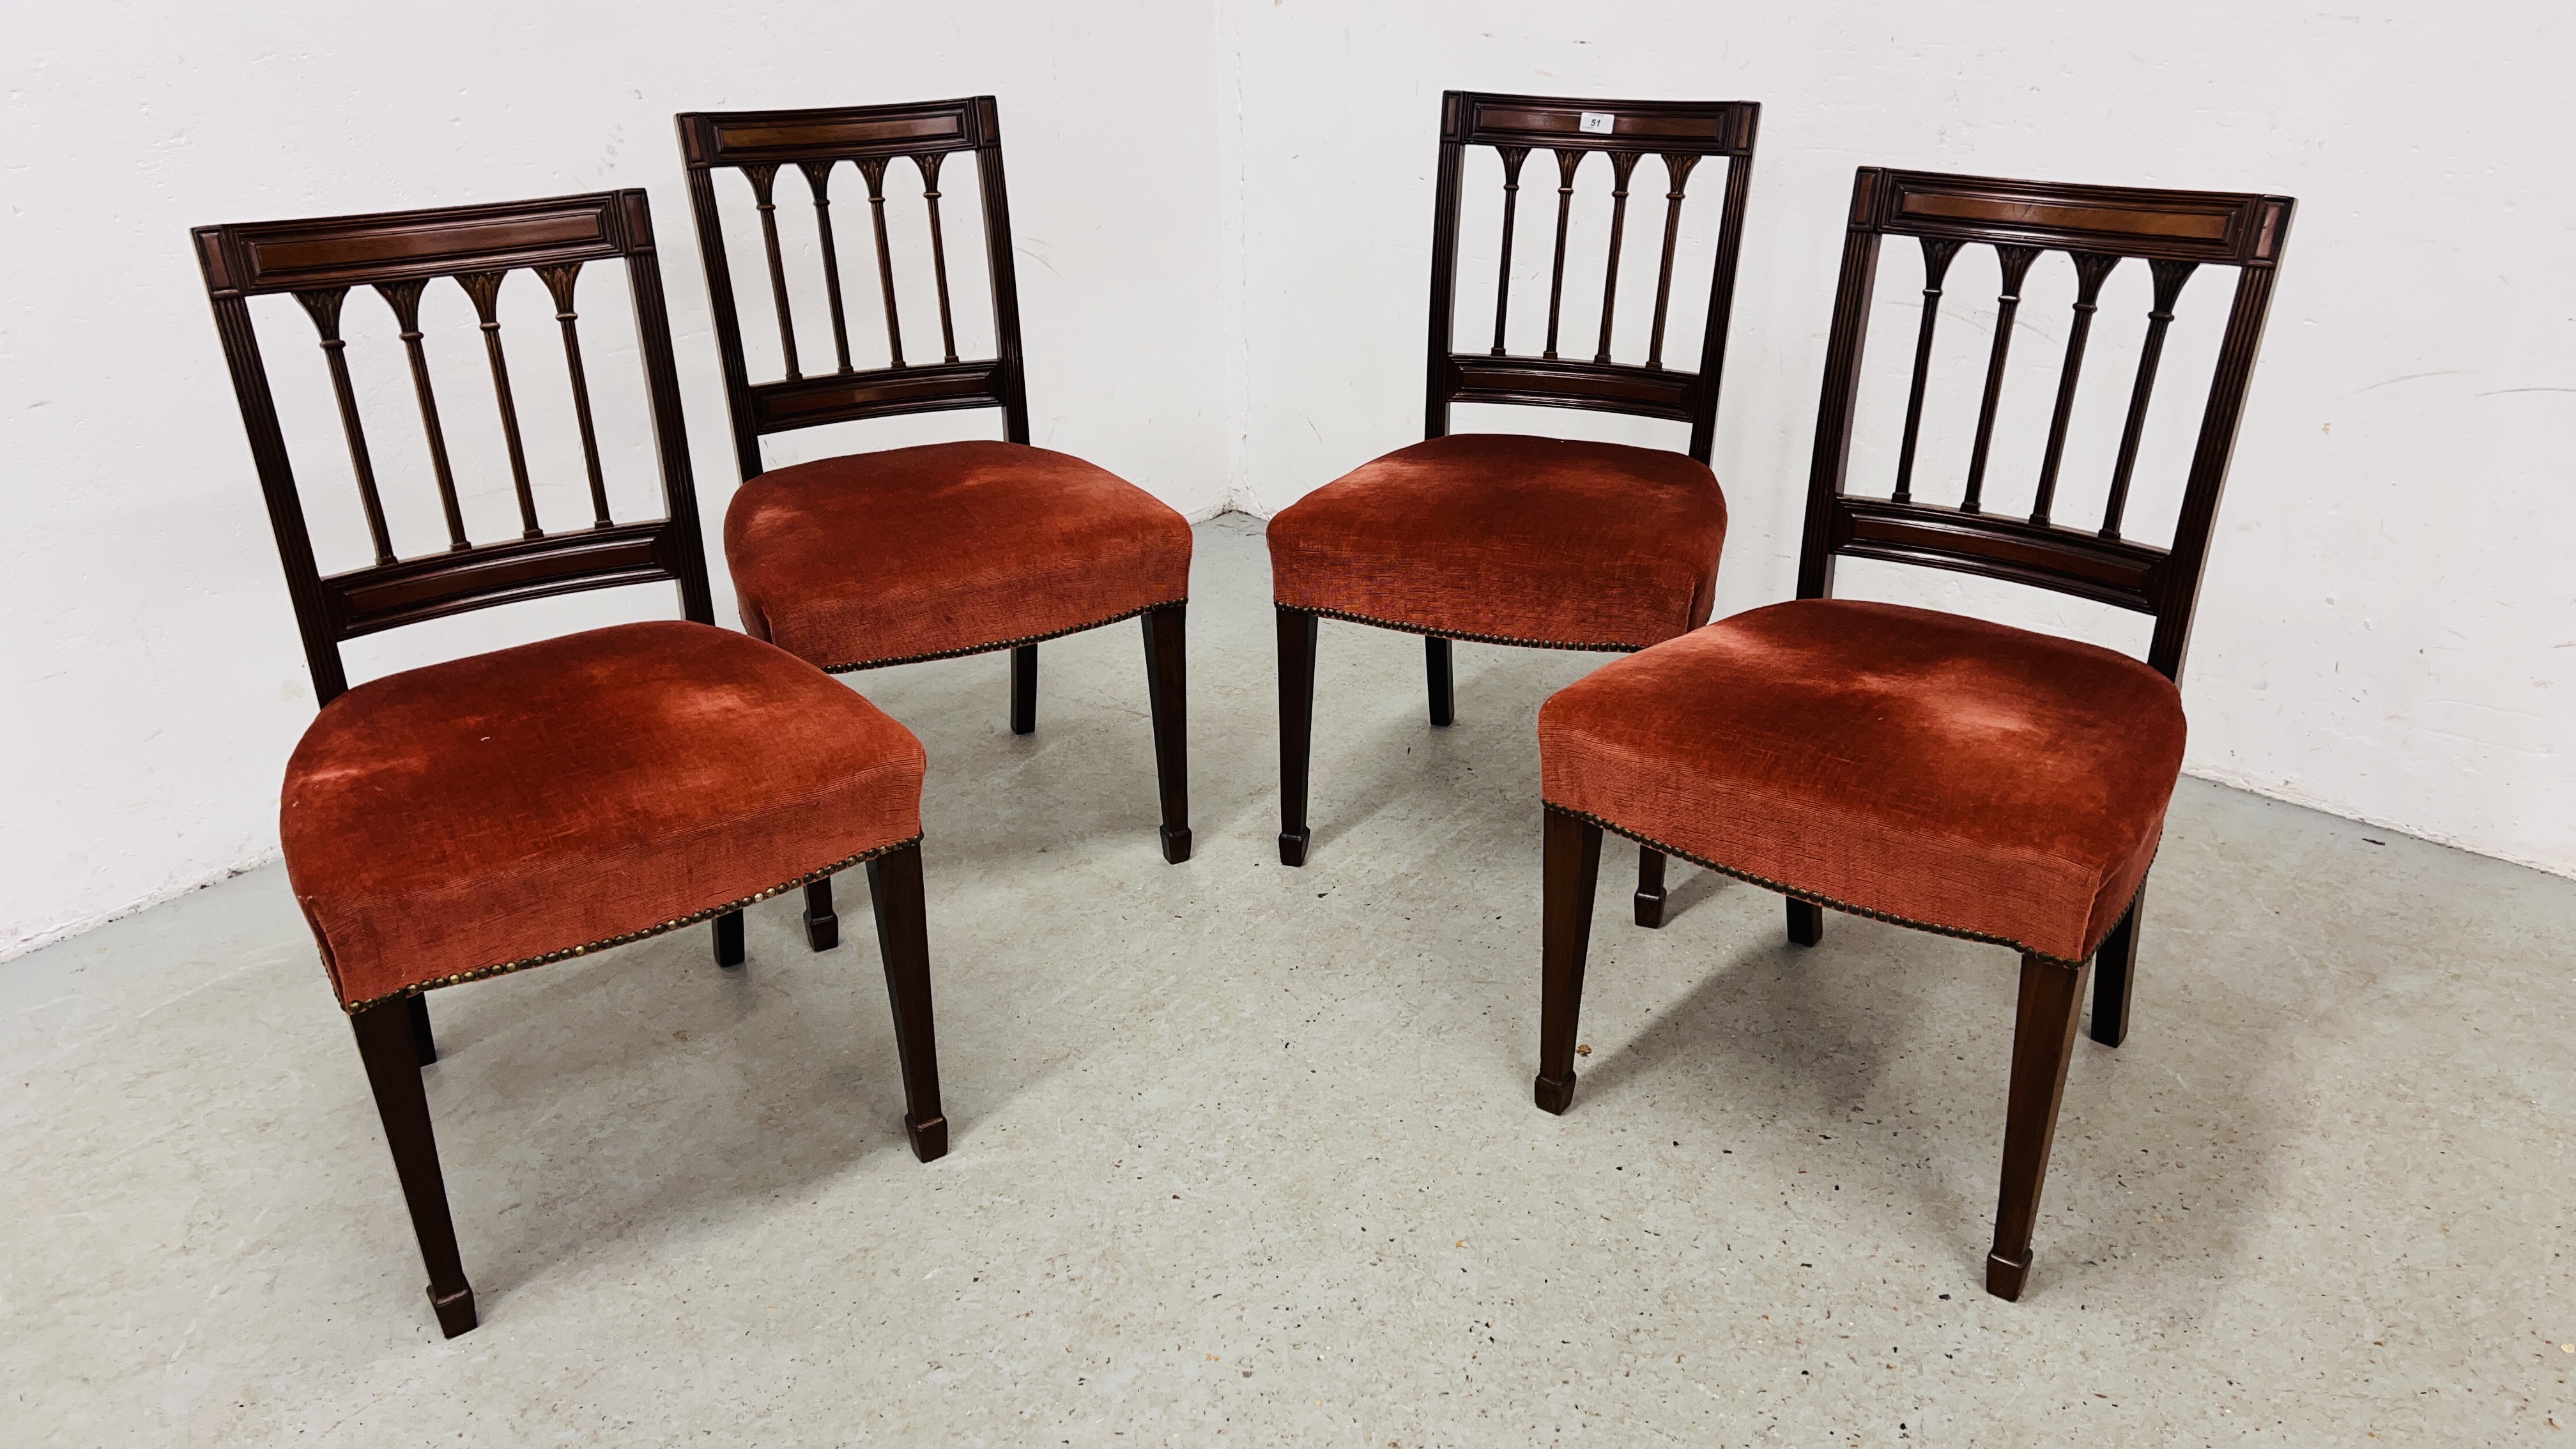 FOUR LATE GEORGIAN DINING CHAIRS IN HEPPLWHITE STYLE WITH PINK VELOUR STUFF OVER SEATS